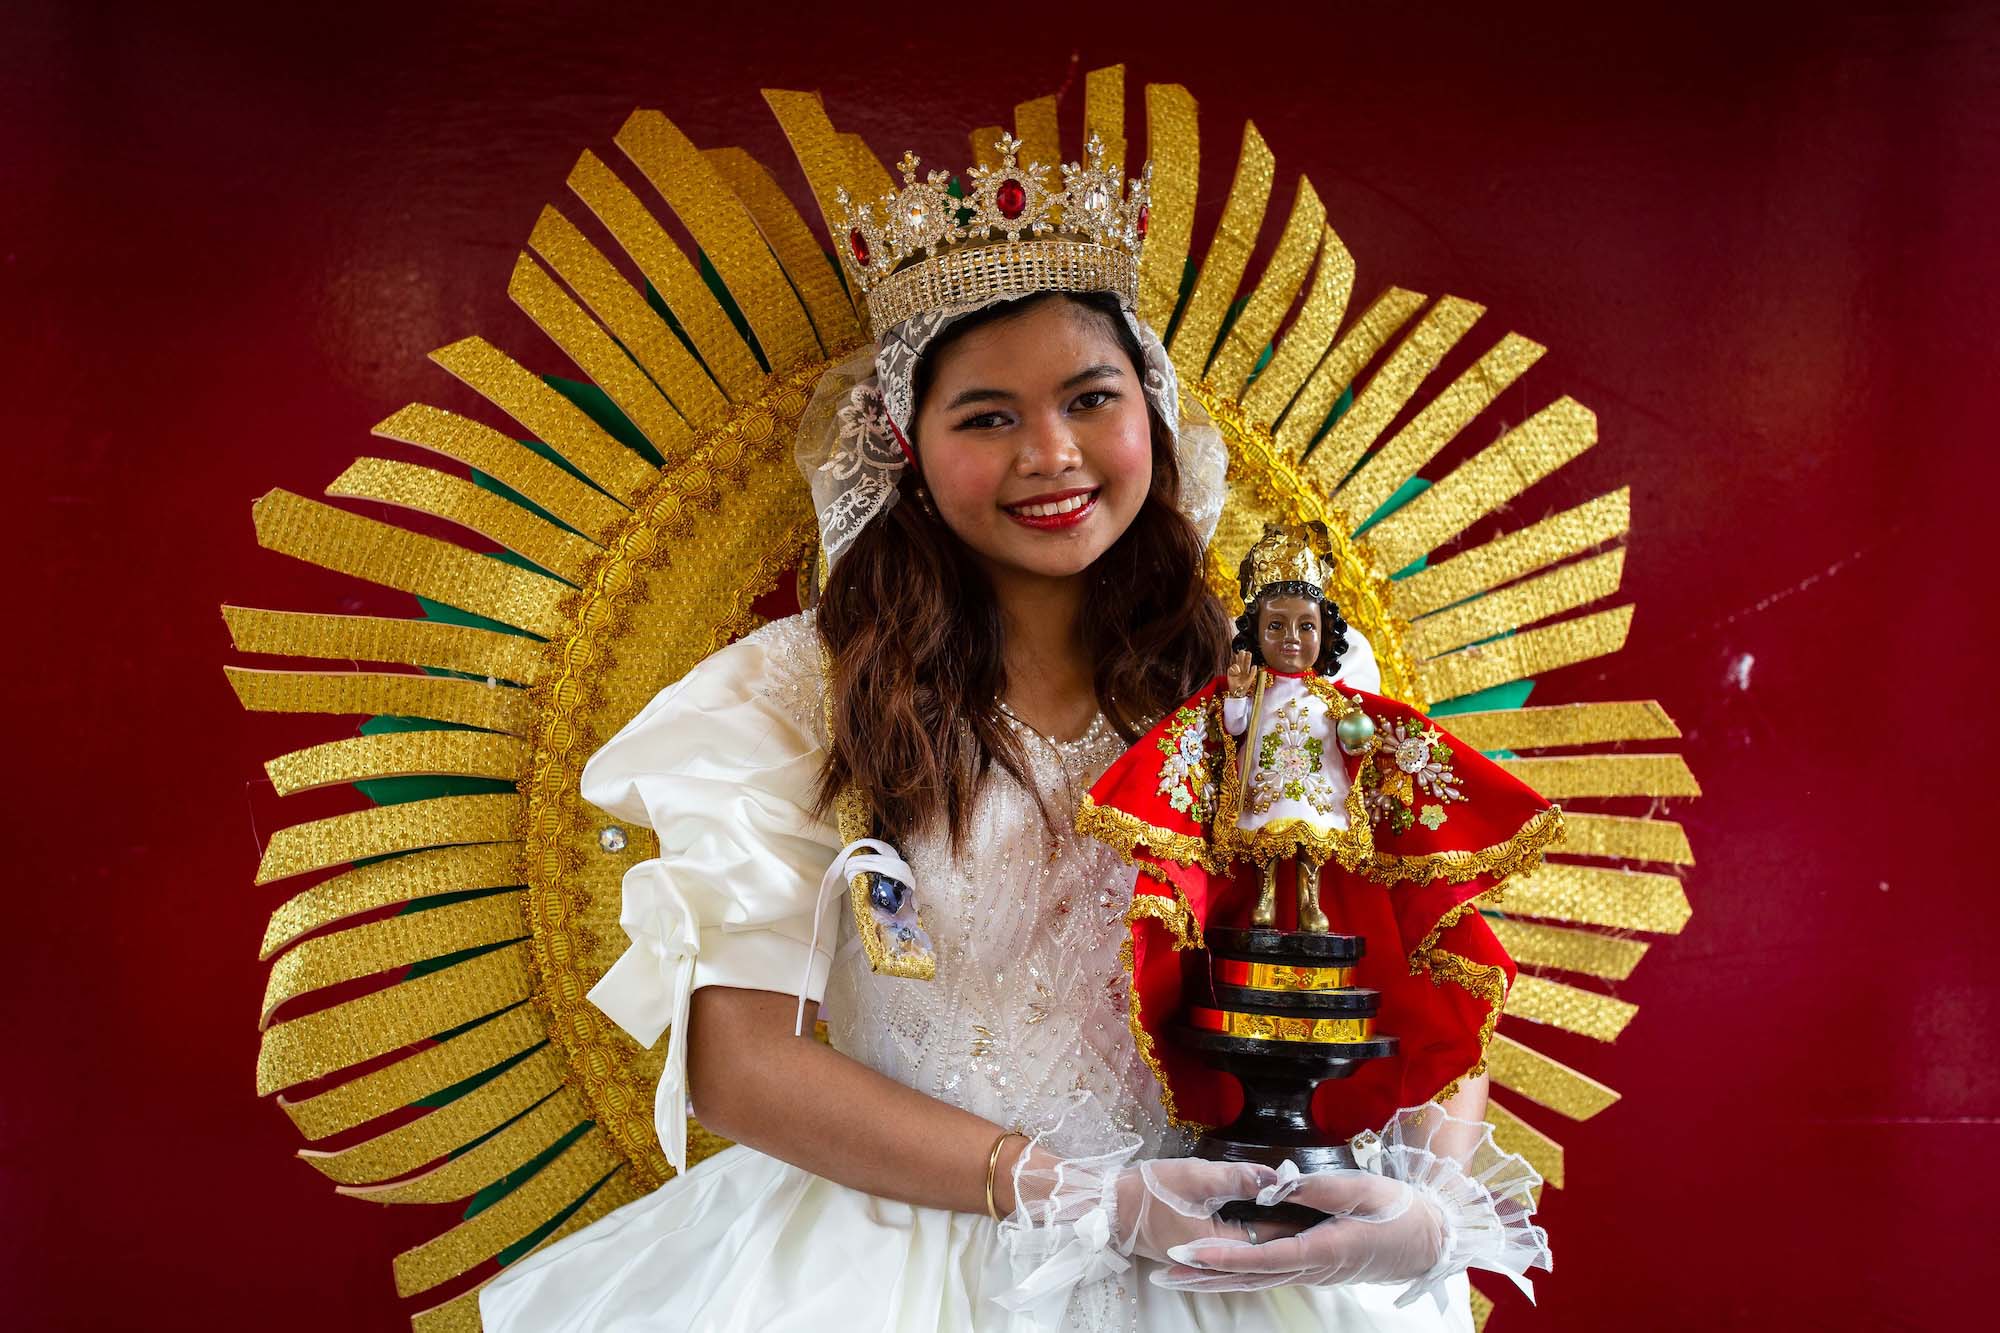 The queen of the Debutantes of Macau dance troupe poses for a portrait before the start of the Sinulog procession